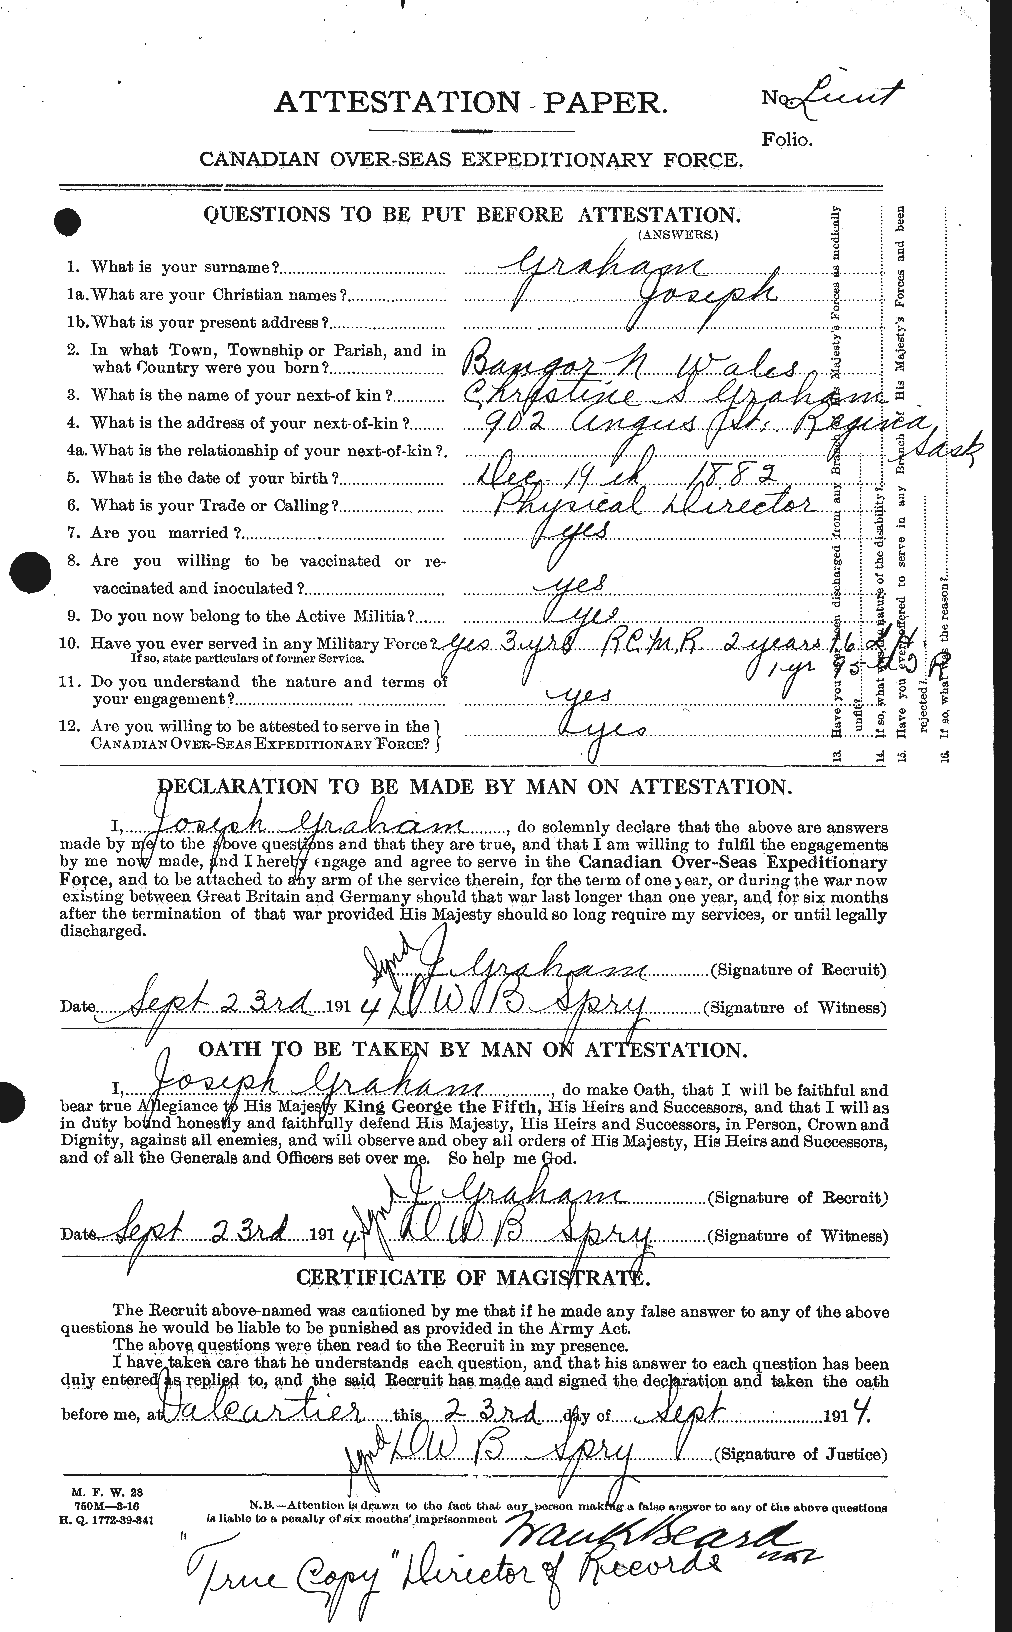 Personnel Records of the First World War - CEF 359239a